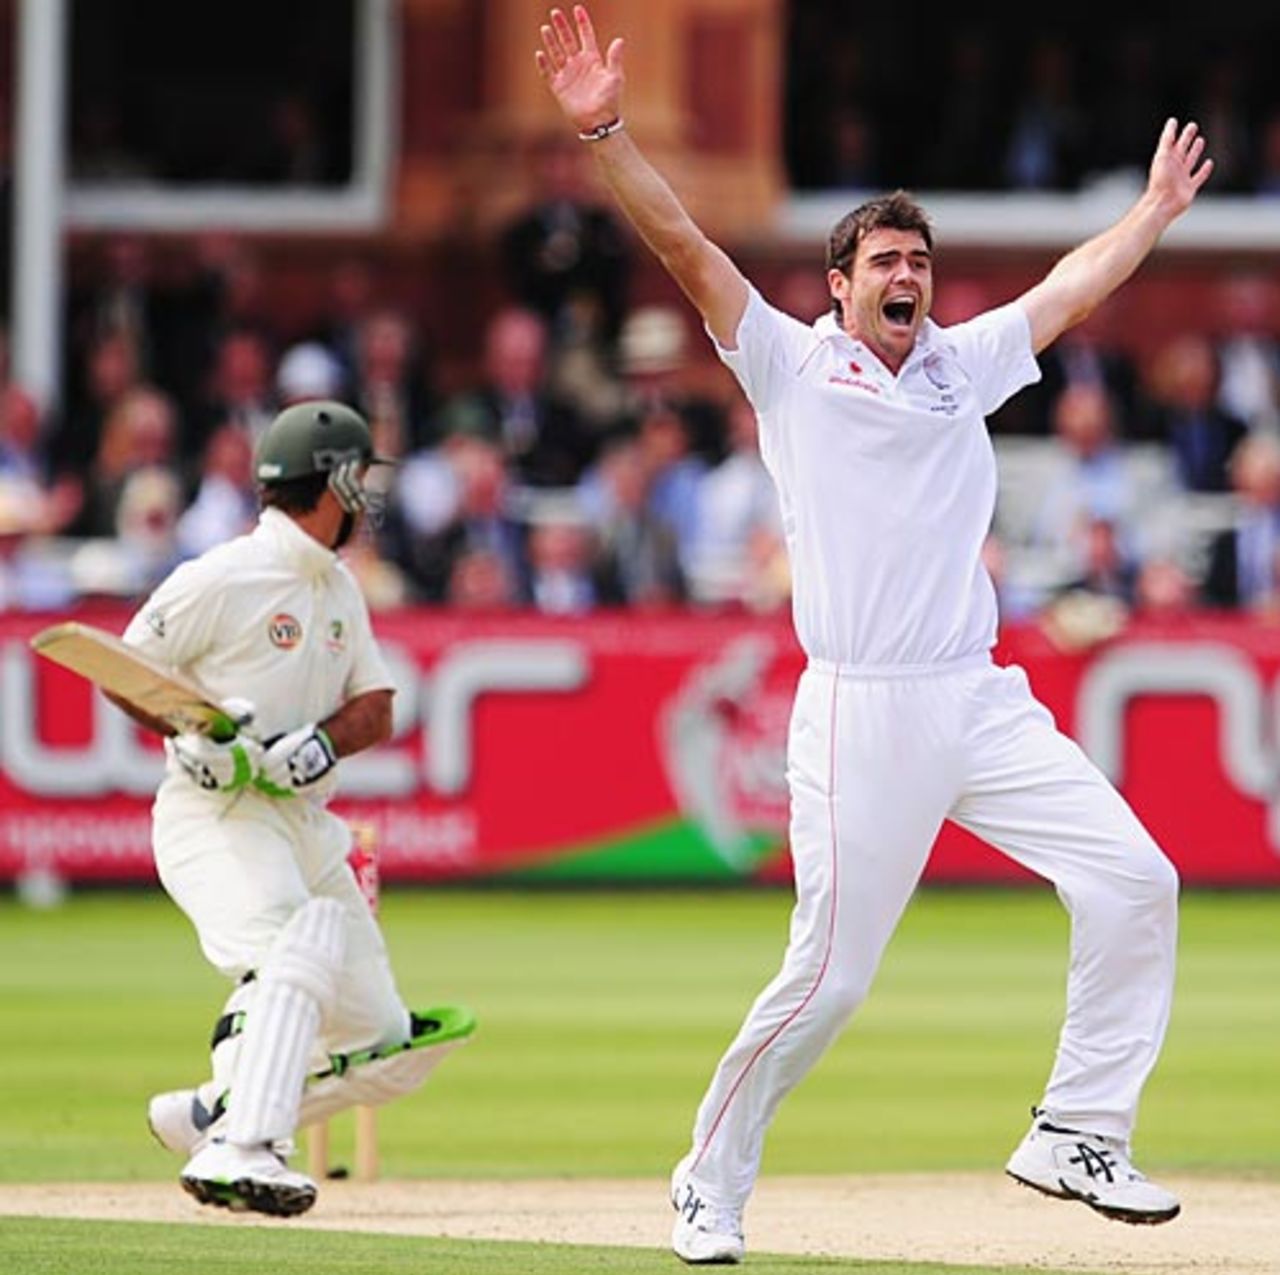 James Anderson appeals for lbw against Ricky Ponting, England v Australia, 2nd Test, Lord's, 2nd day, July 17, 2009